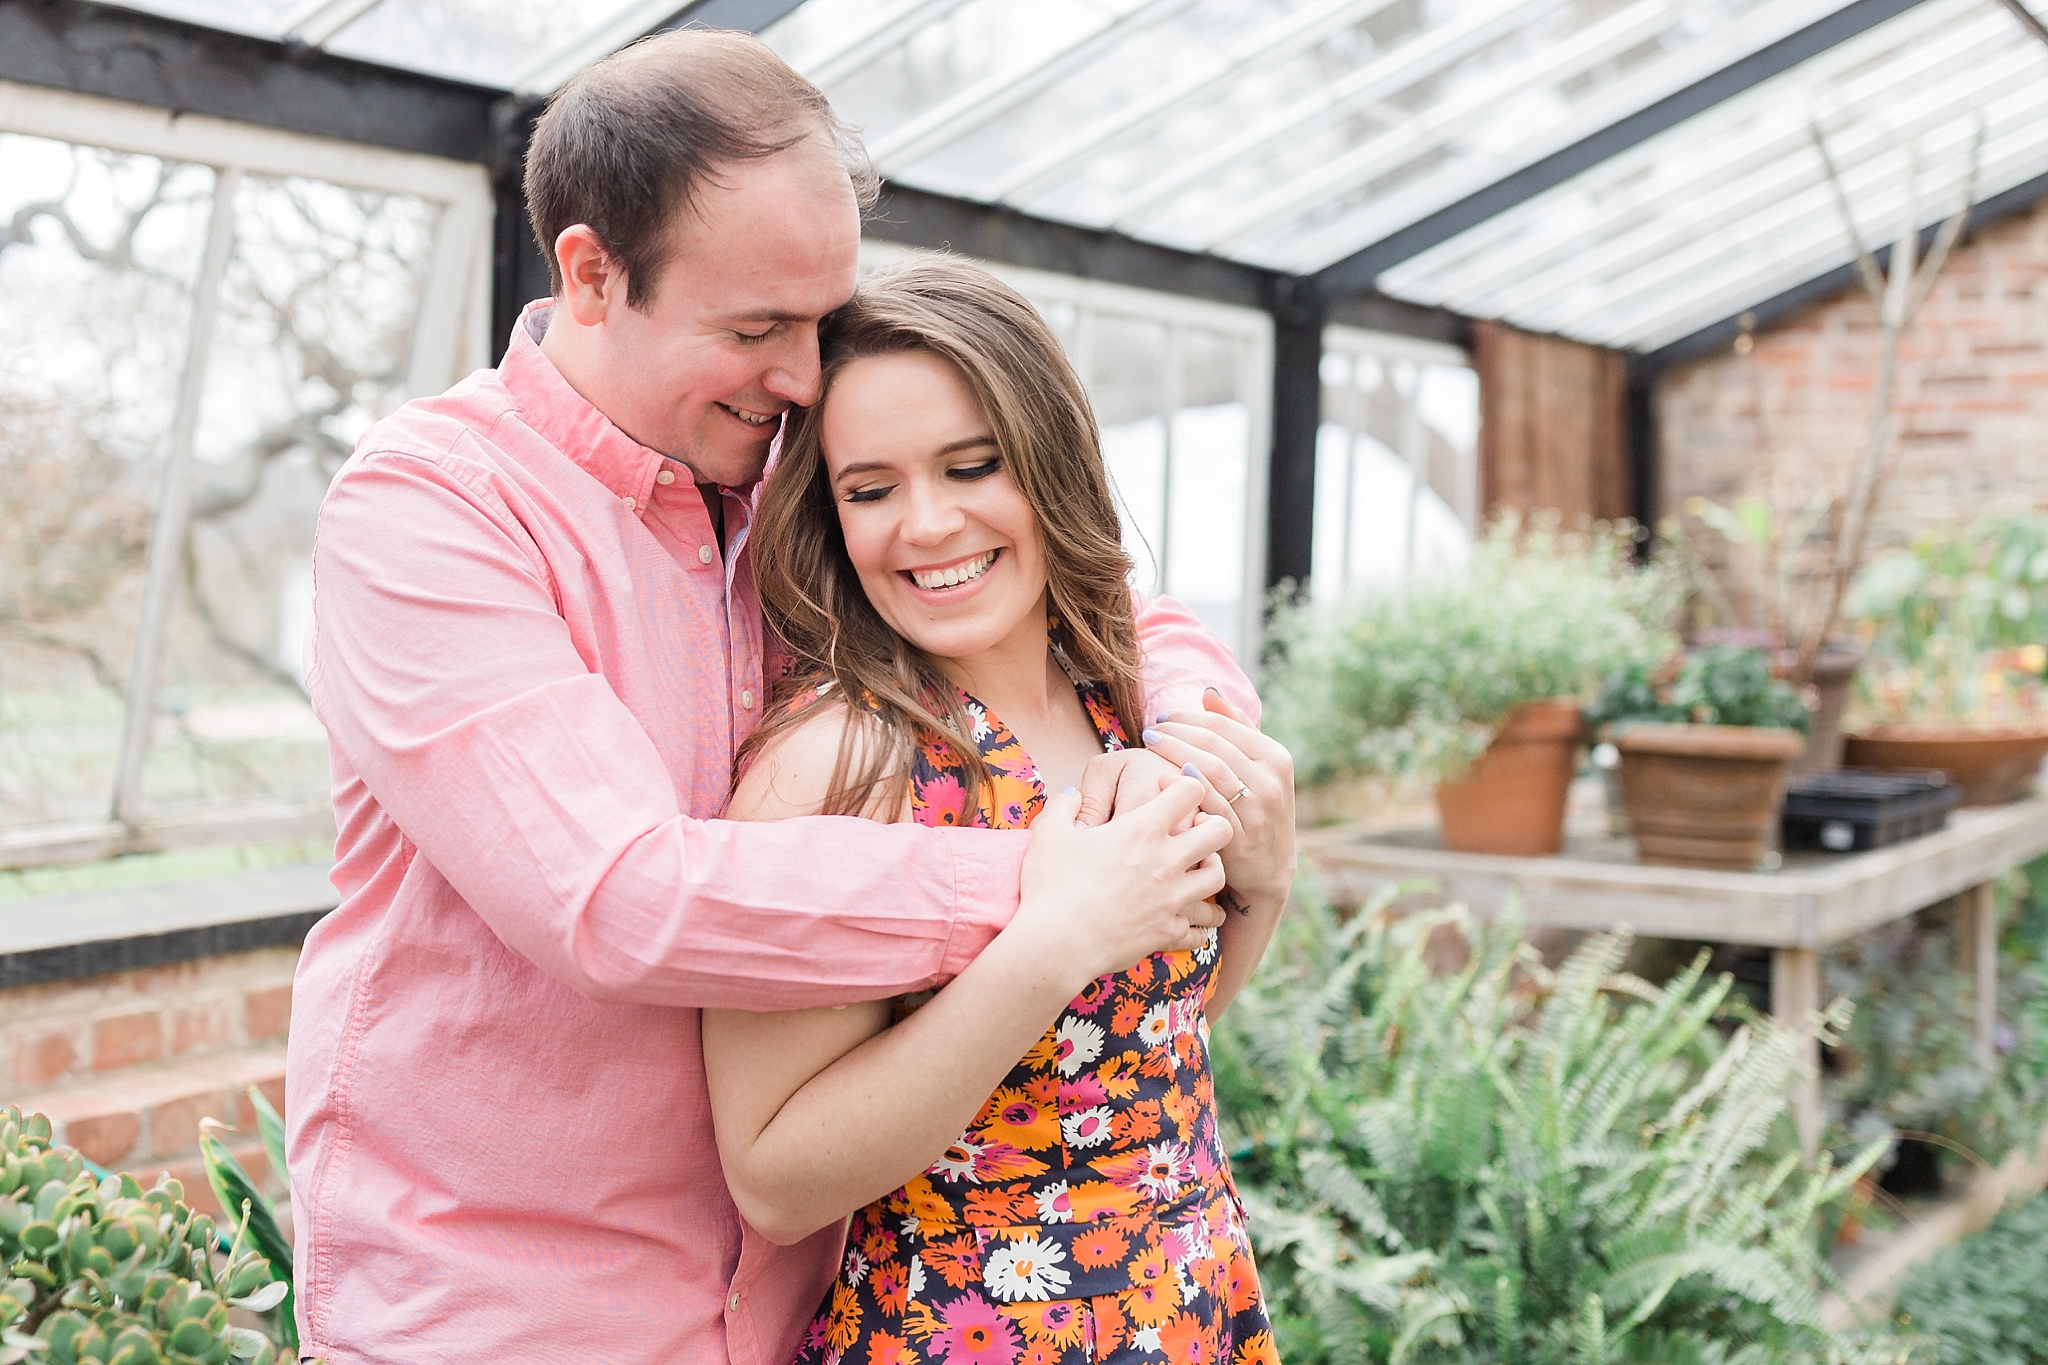 A lovely engagement session in the gardens of Oatlands Plantation Home in Leesburg, VA is captured by Washington, DC wedding photographer, Alicia Lacey.